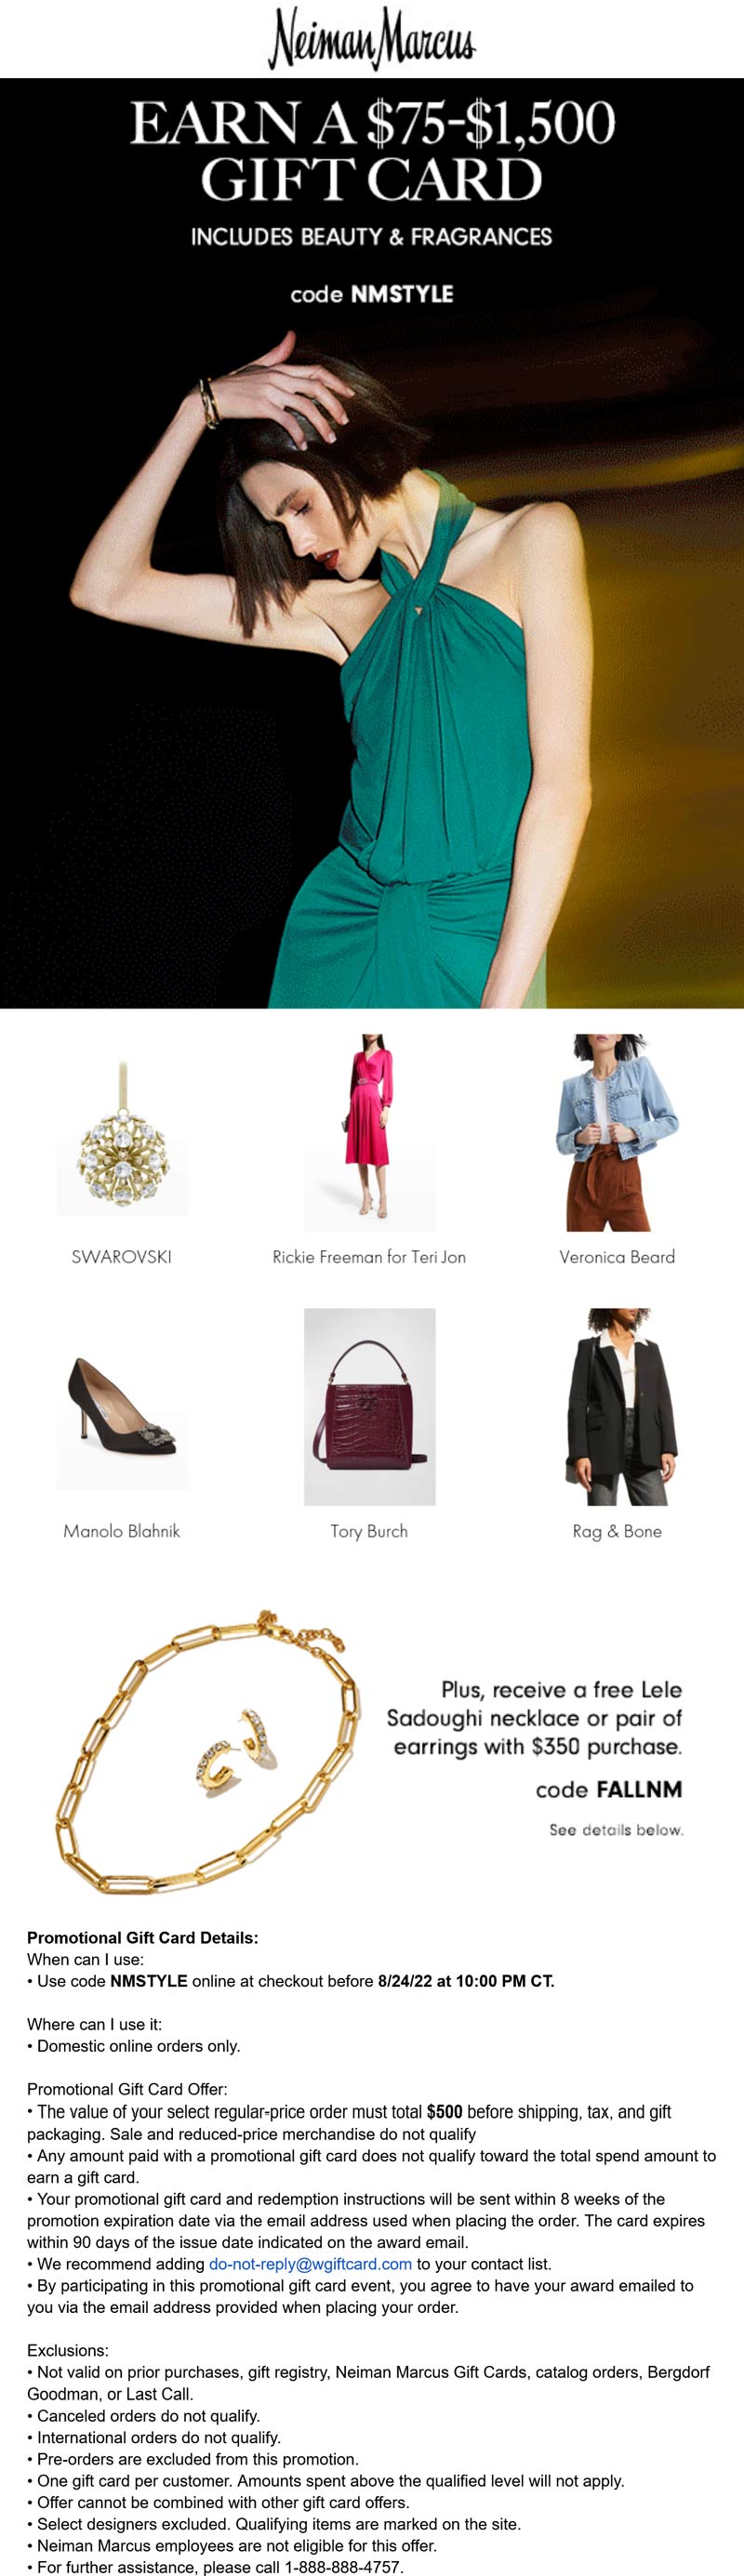 Neiman Marcus stores Coupon  $75-$1500 card on $500+ spent + free earrings today at Neiman Marcus via promo code NMSTYLE #neimanmarcus 